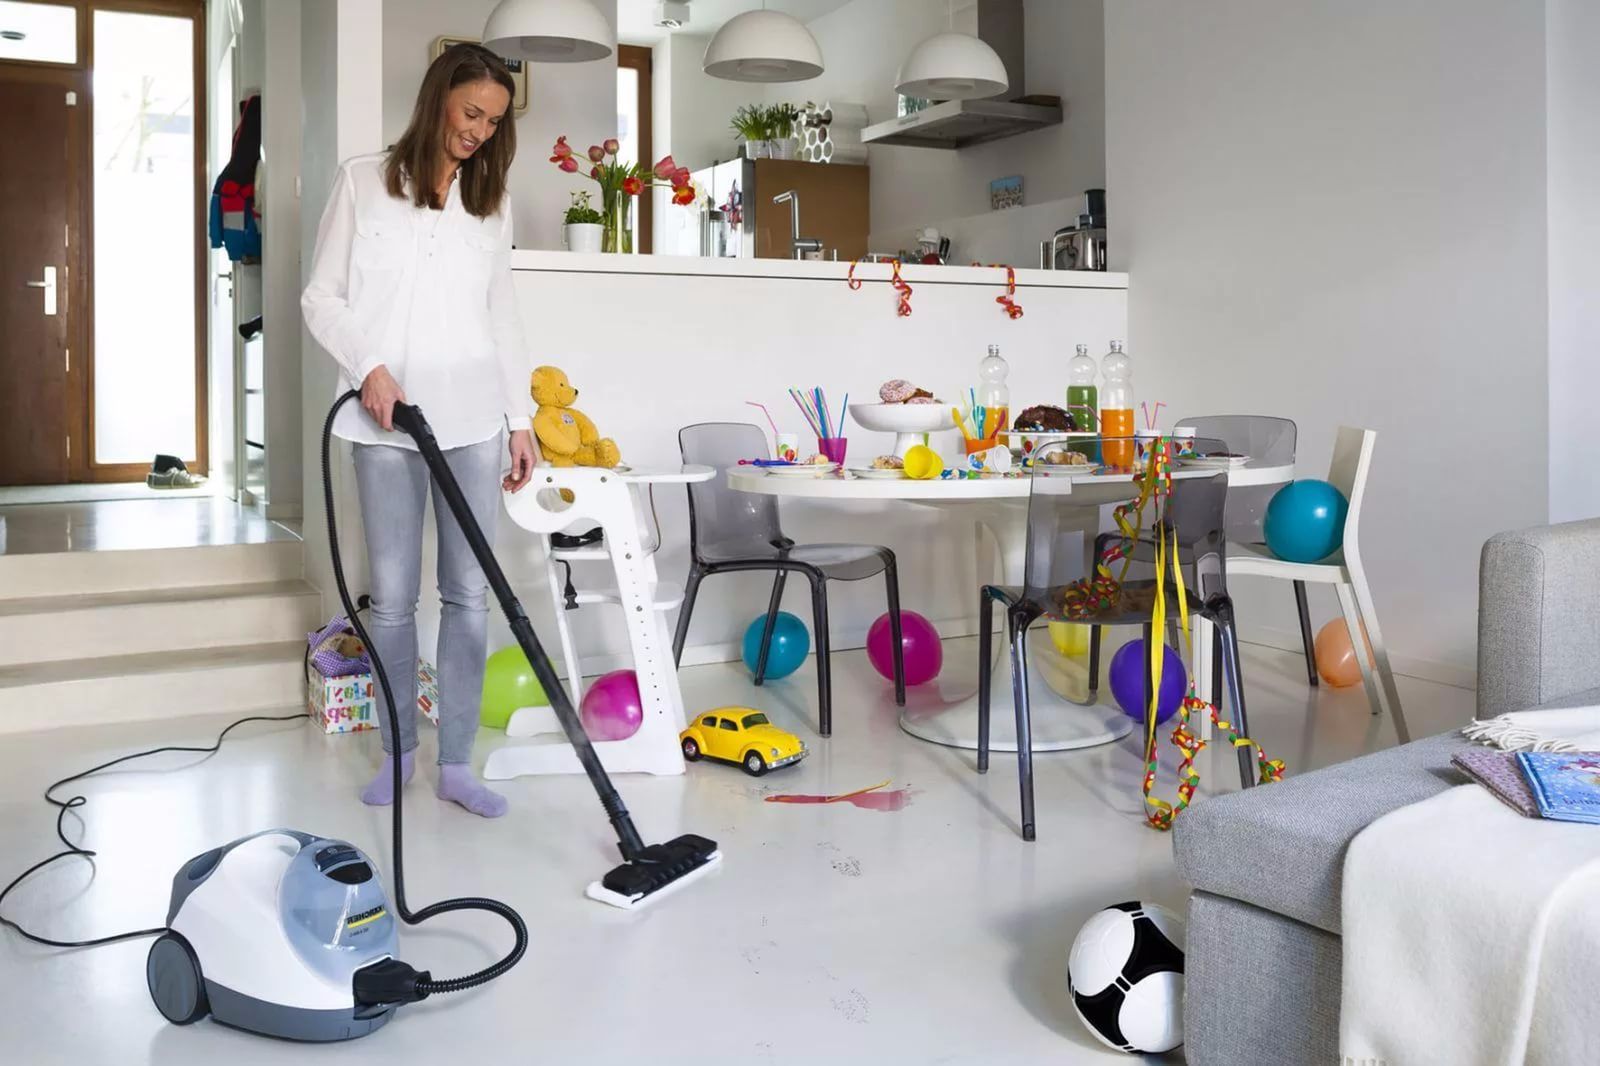 How often should you clean your apartment?